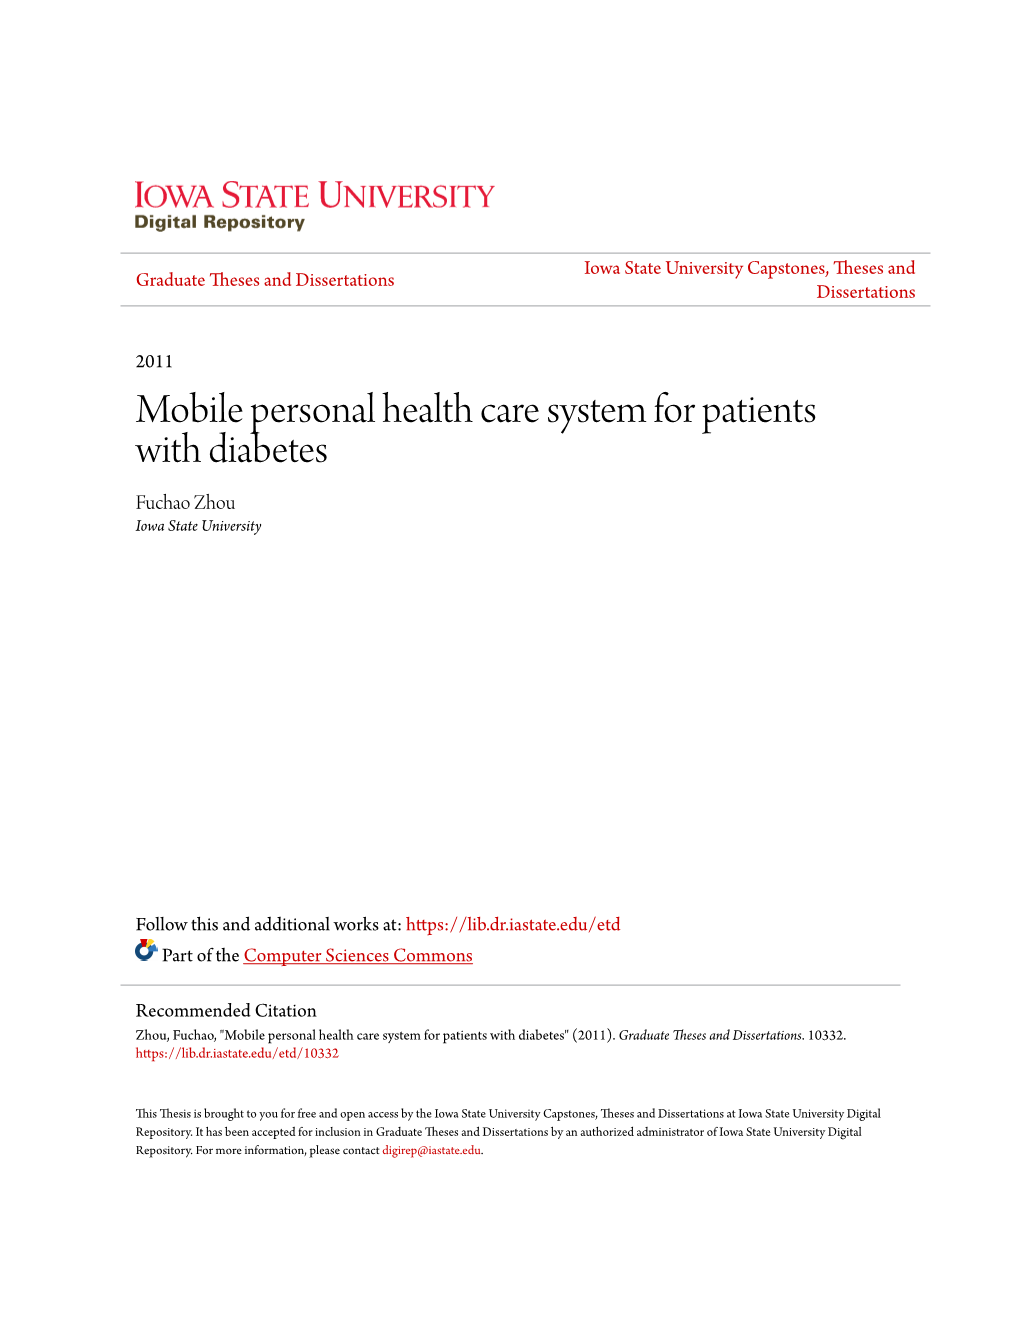 Mobile Personal Health Care System for Patients with Diabetes Fuchao Zhou Iowa State University